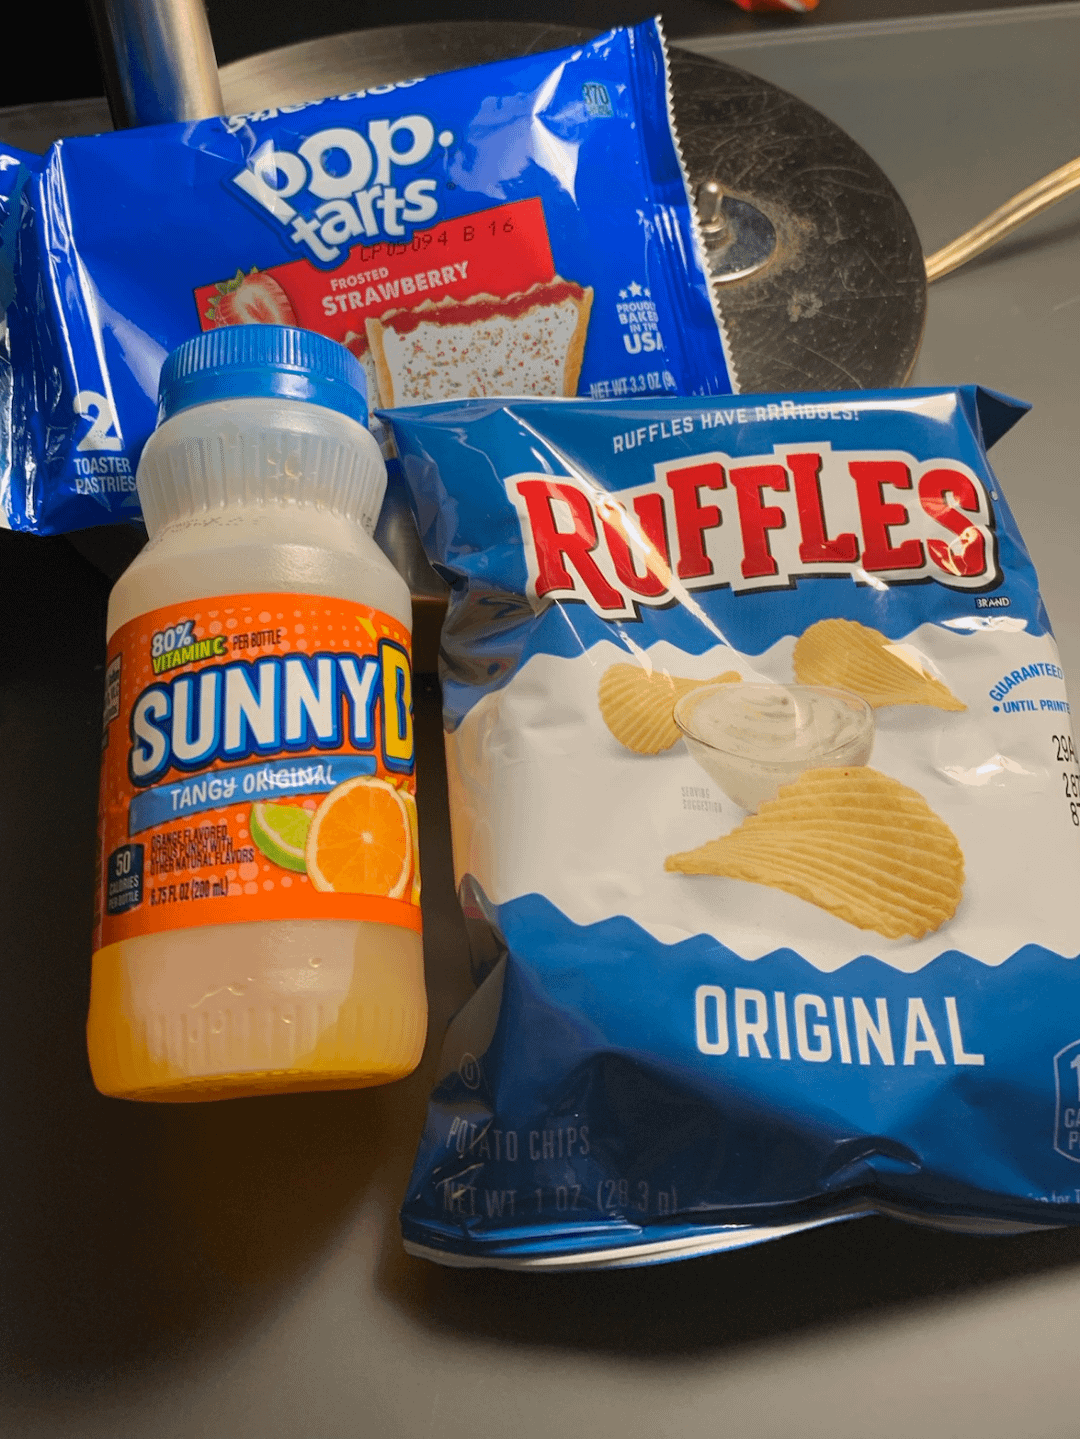 A bottle of SunnyD, a pack of strawberry Pop-Tarts, and a bag of original Ruffles chips on a desk